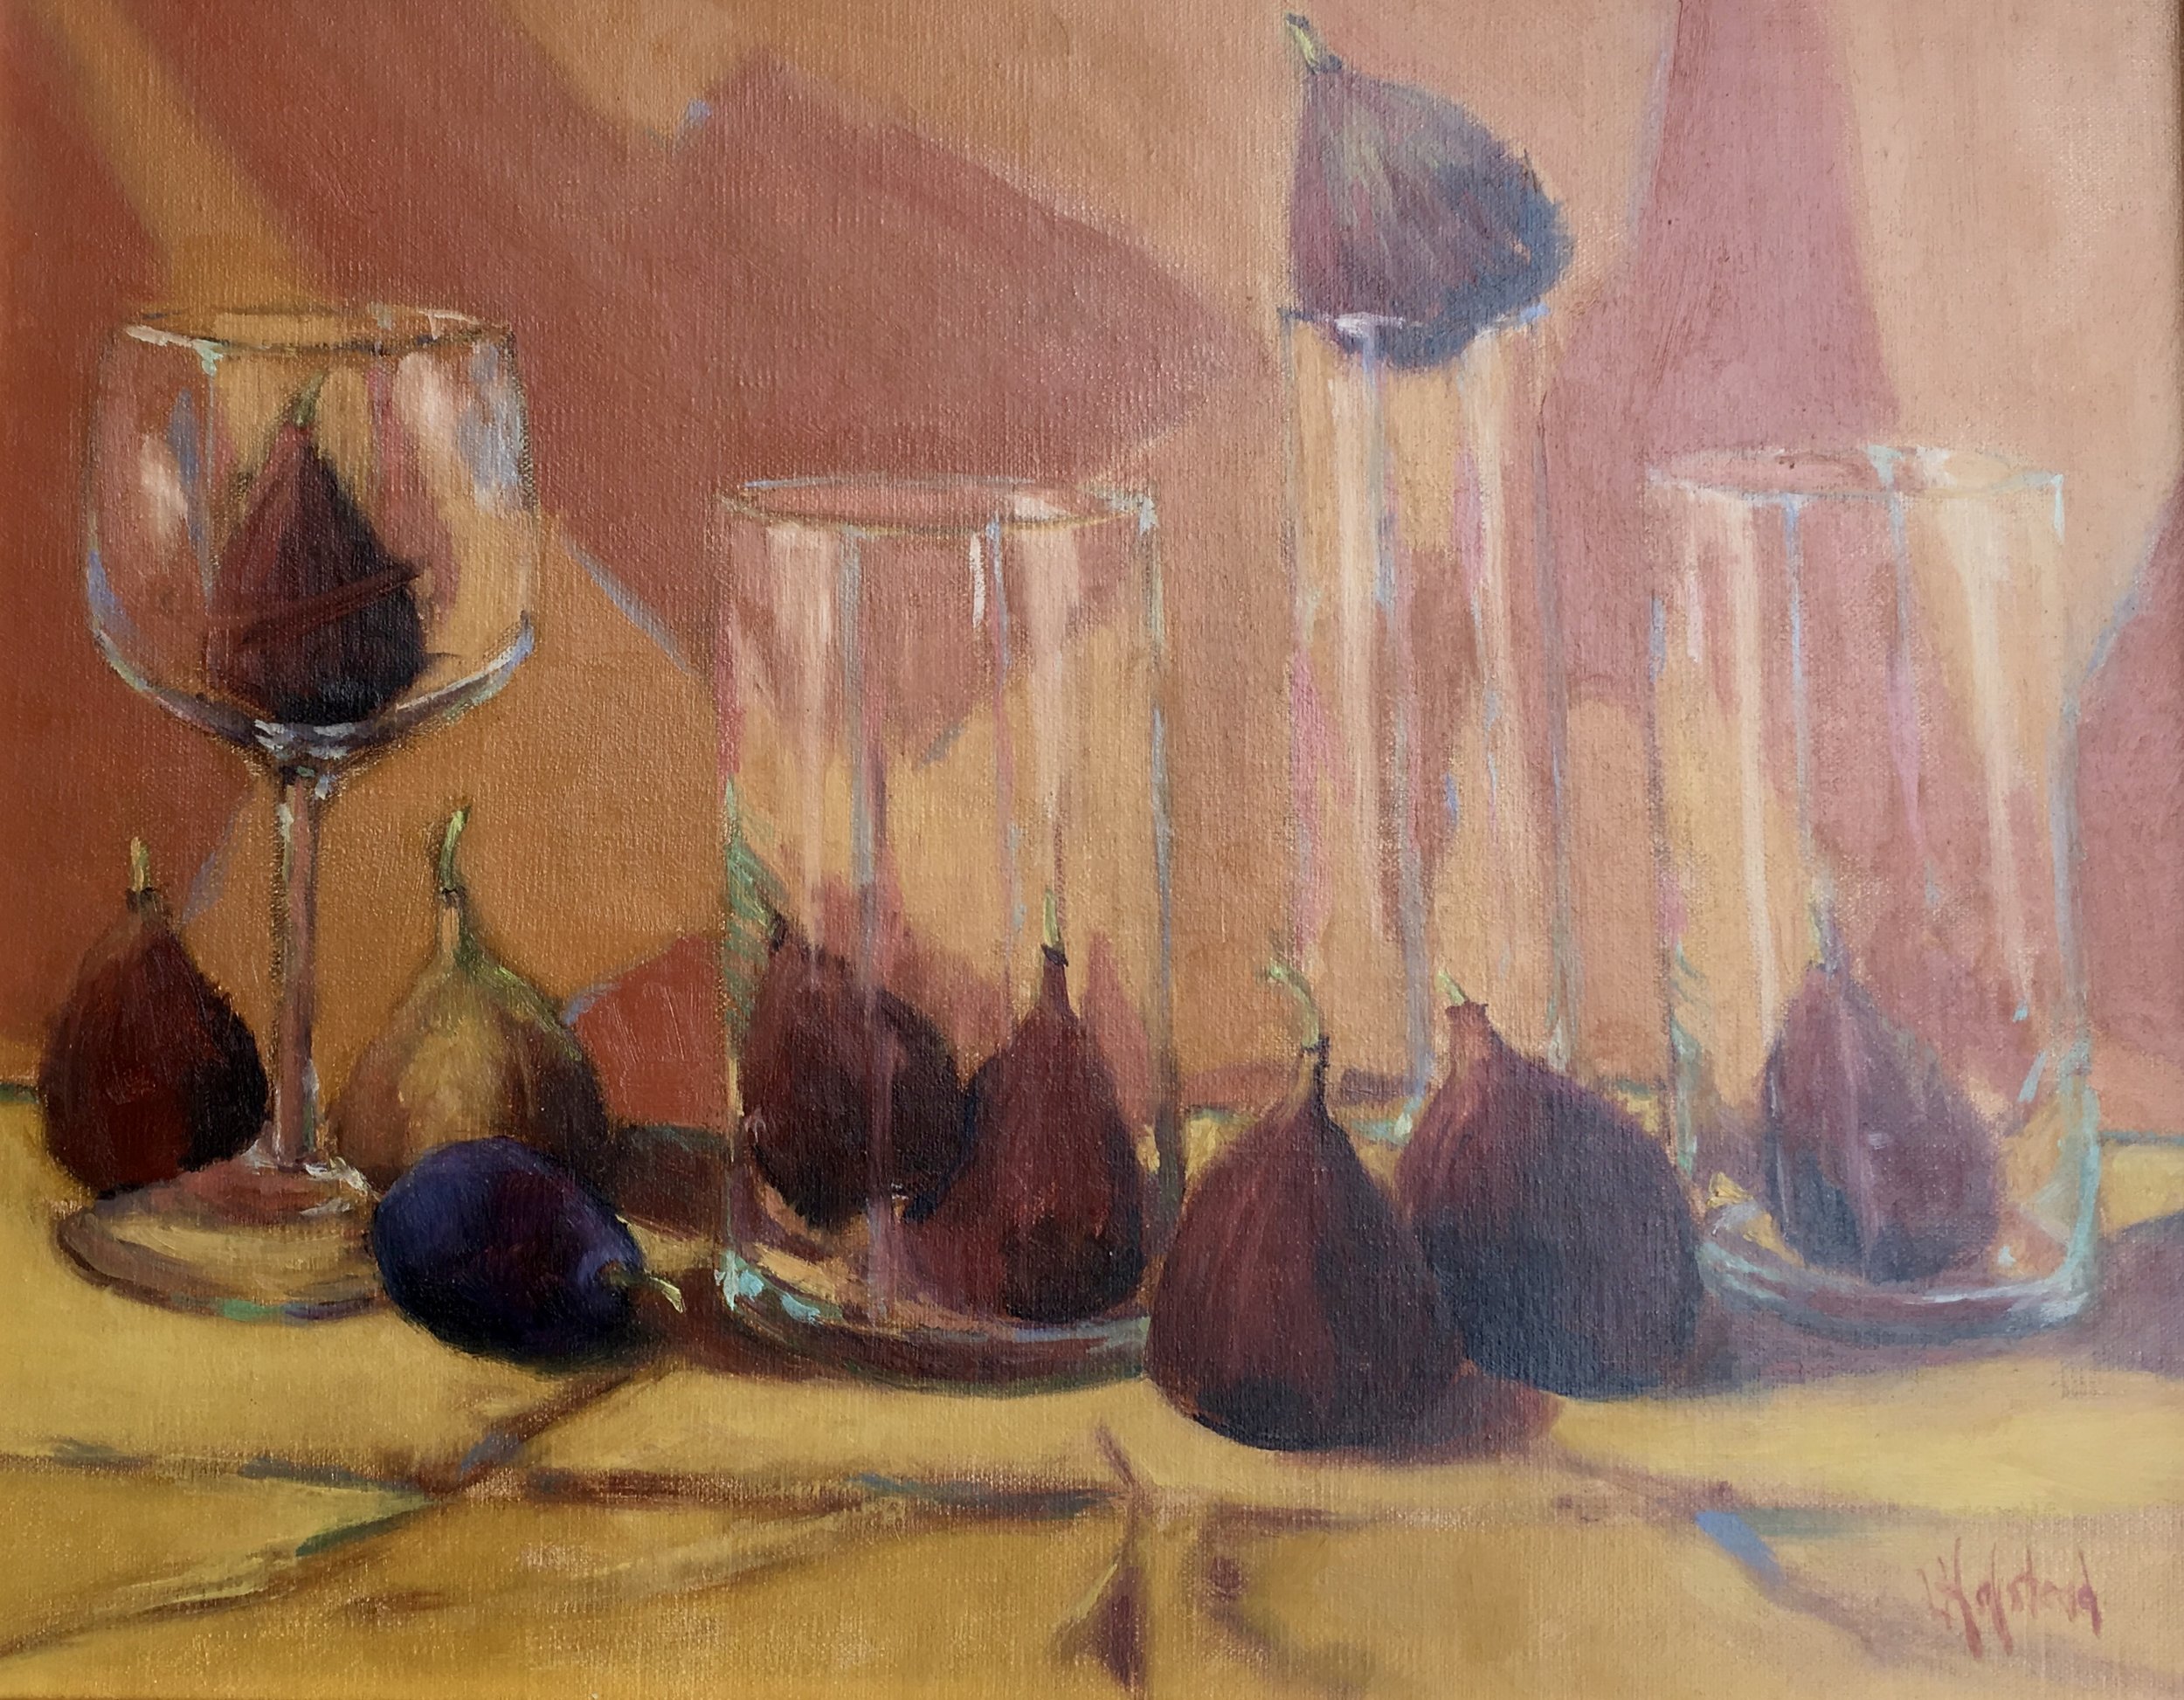 Nine Figs and Aplomb, Oil on Linen, 11 x 14